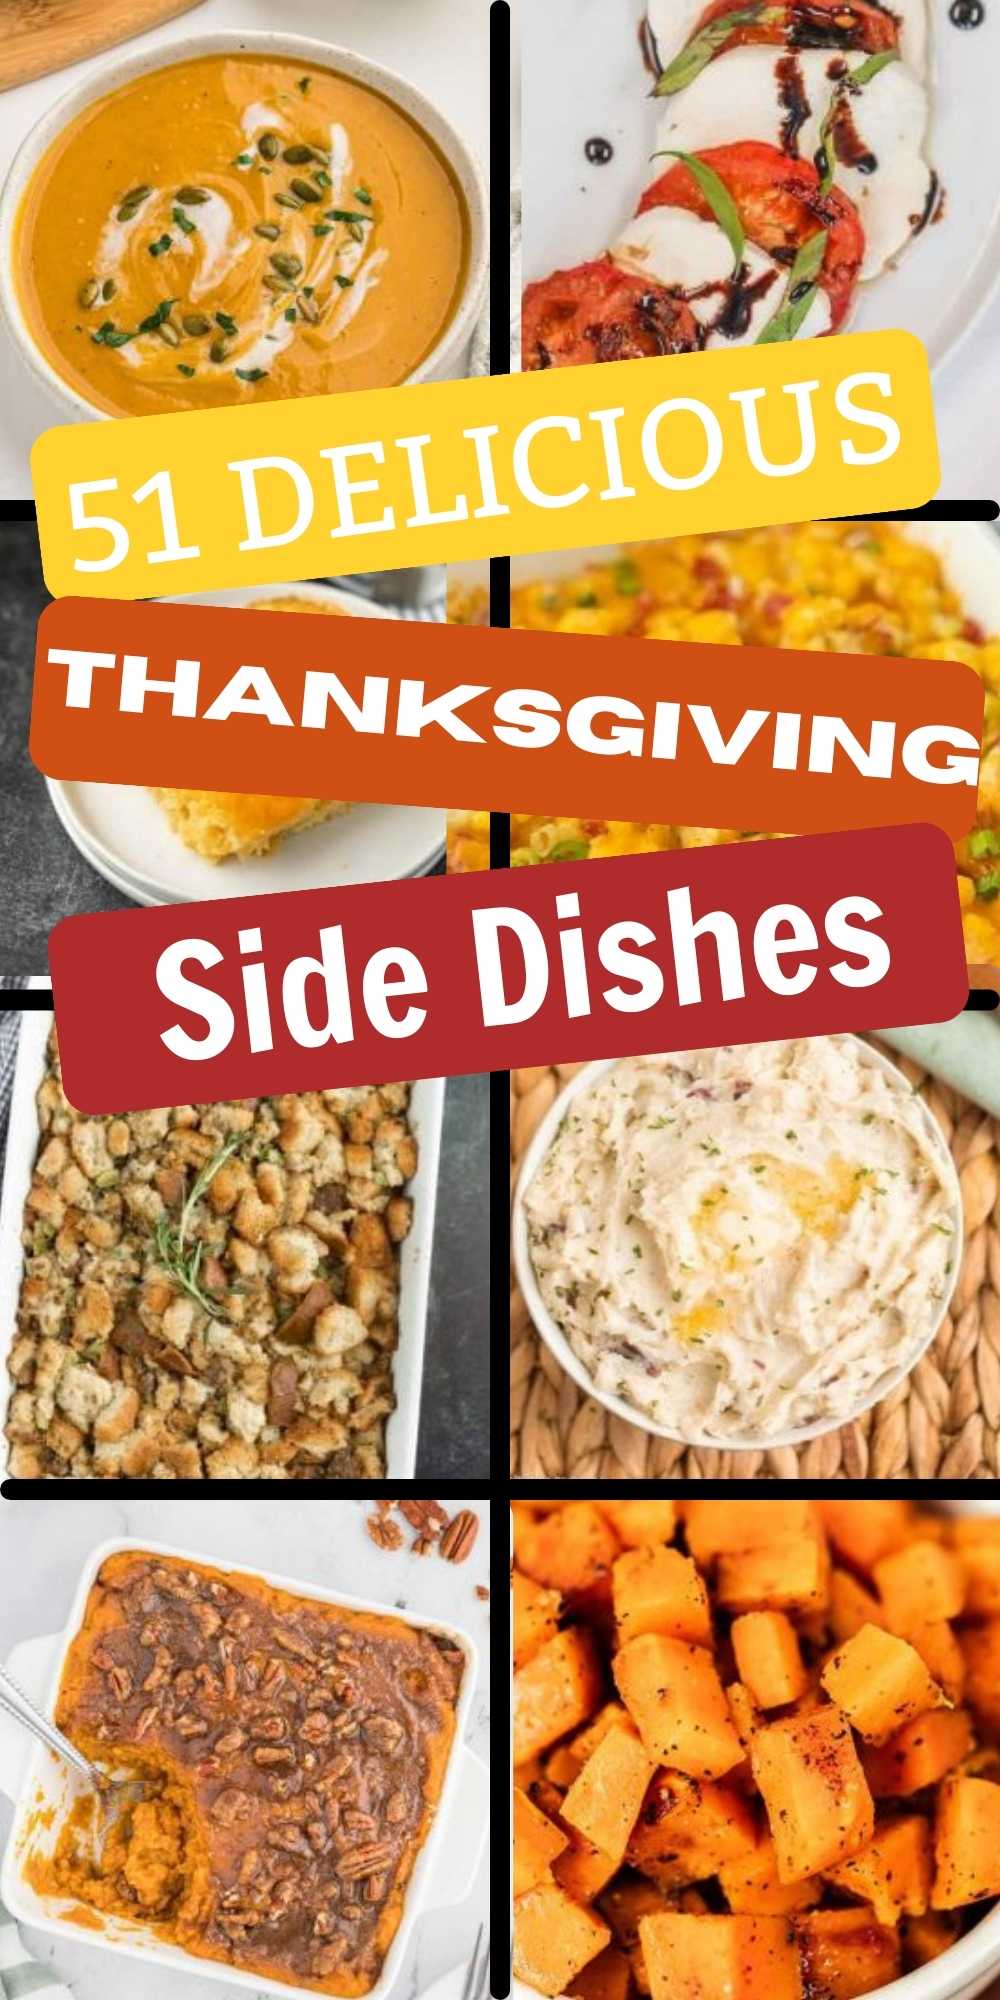 
Pair your meals this Thanksgiving with the best Thanksgiving side dishes. 51 easy side dish ideas for Thanksgiving that friends and family will enjoy! These are the best recipes including easy make ahead ideas, recipes for a crowd, crockpot recipes, healthy options, cold sides and Southern classics. #eatingonadime #easythanksgivingsidedishes #thanksgiving